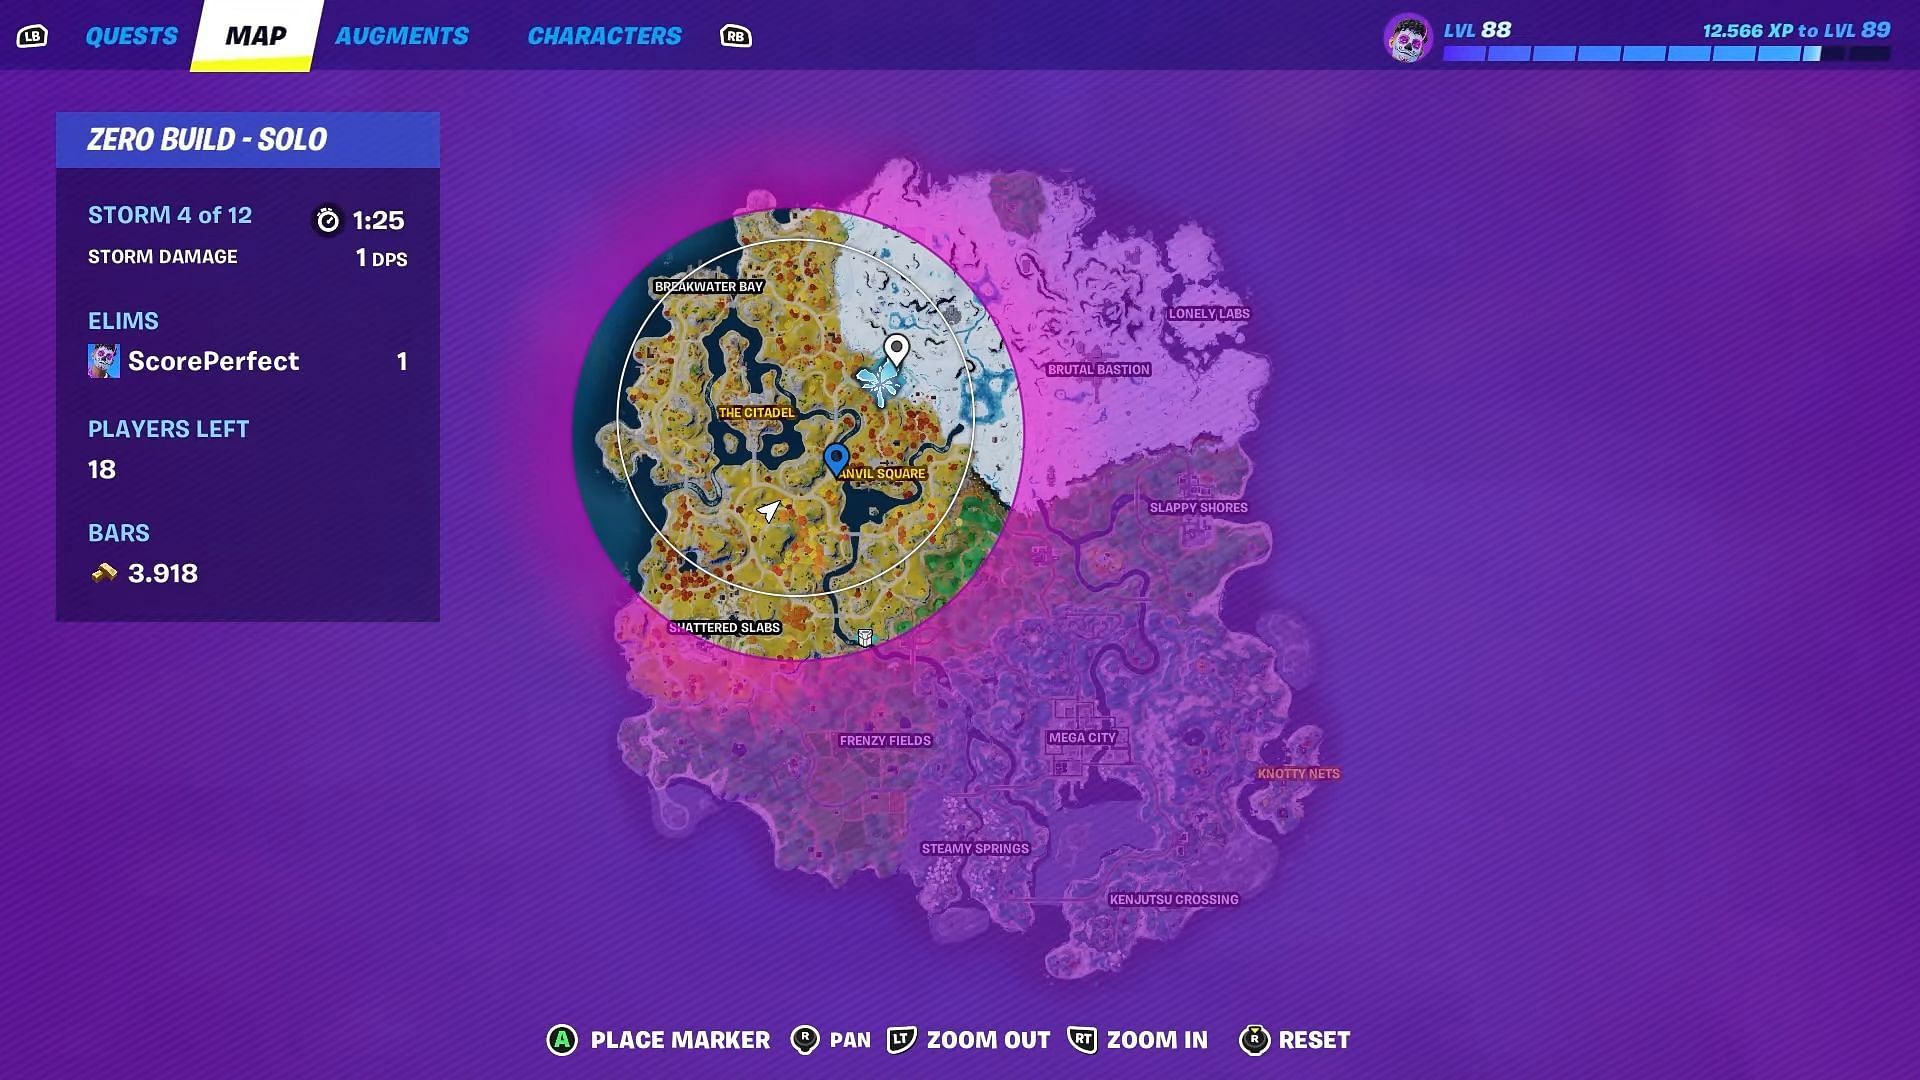 The island spawns randomly on the map (Image via Epic Games)